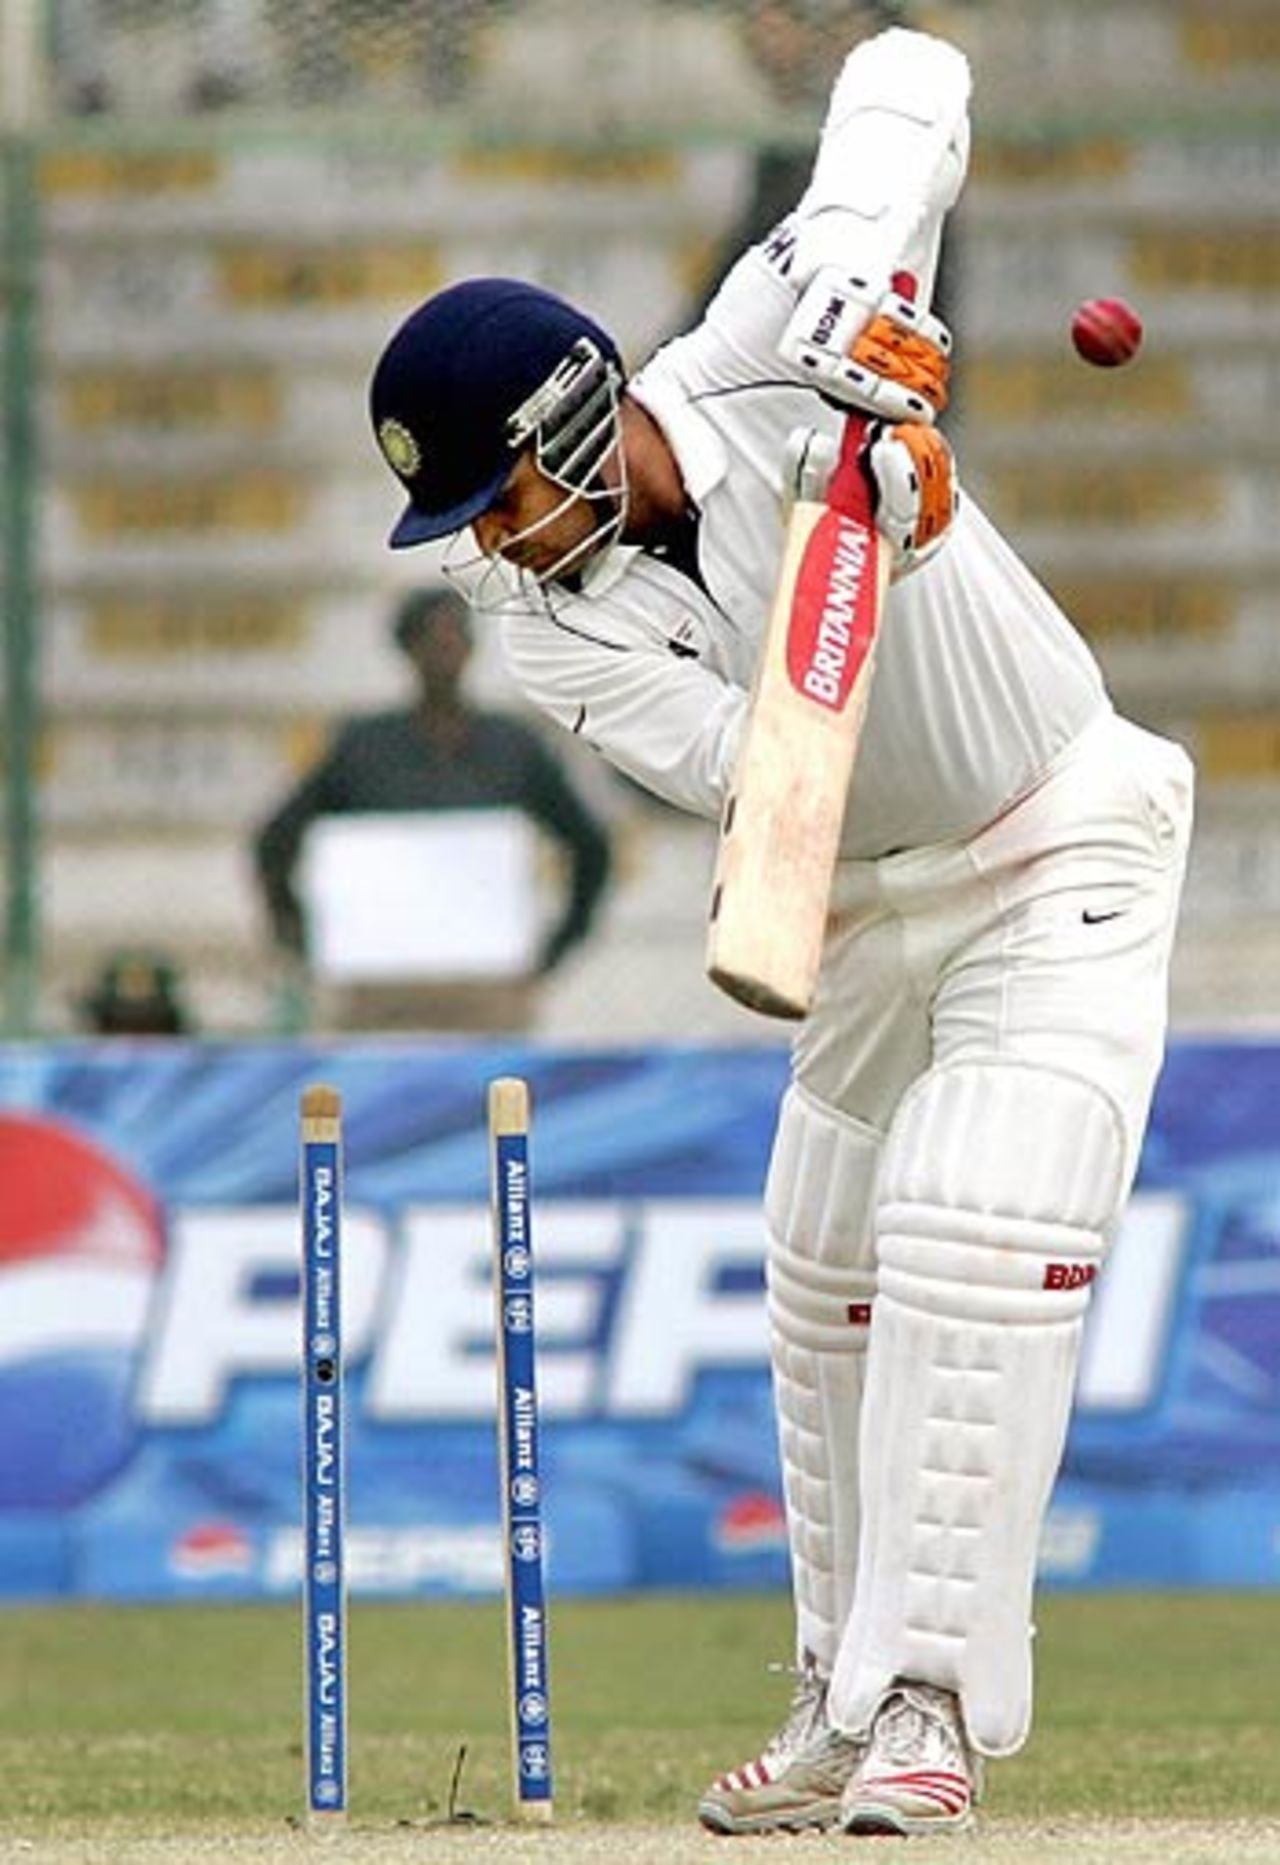 Virender Sehwag loses his middle stump as India began horribly in their chase of 607, Pakistan v India, 3rd Test, 4th day, Karachi, February 1,2006